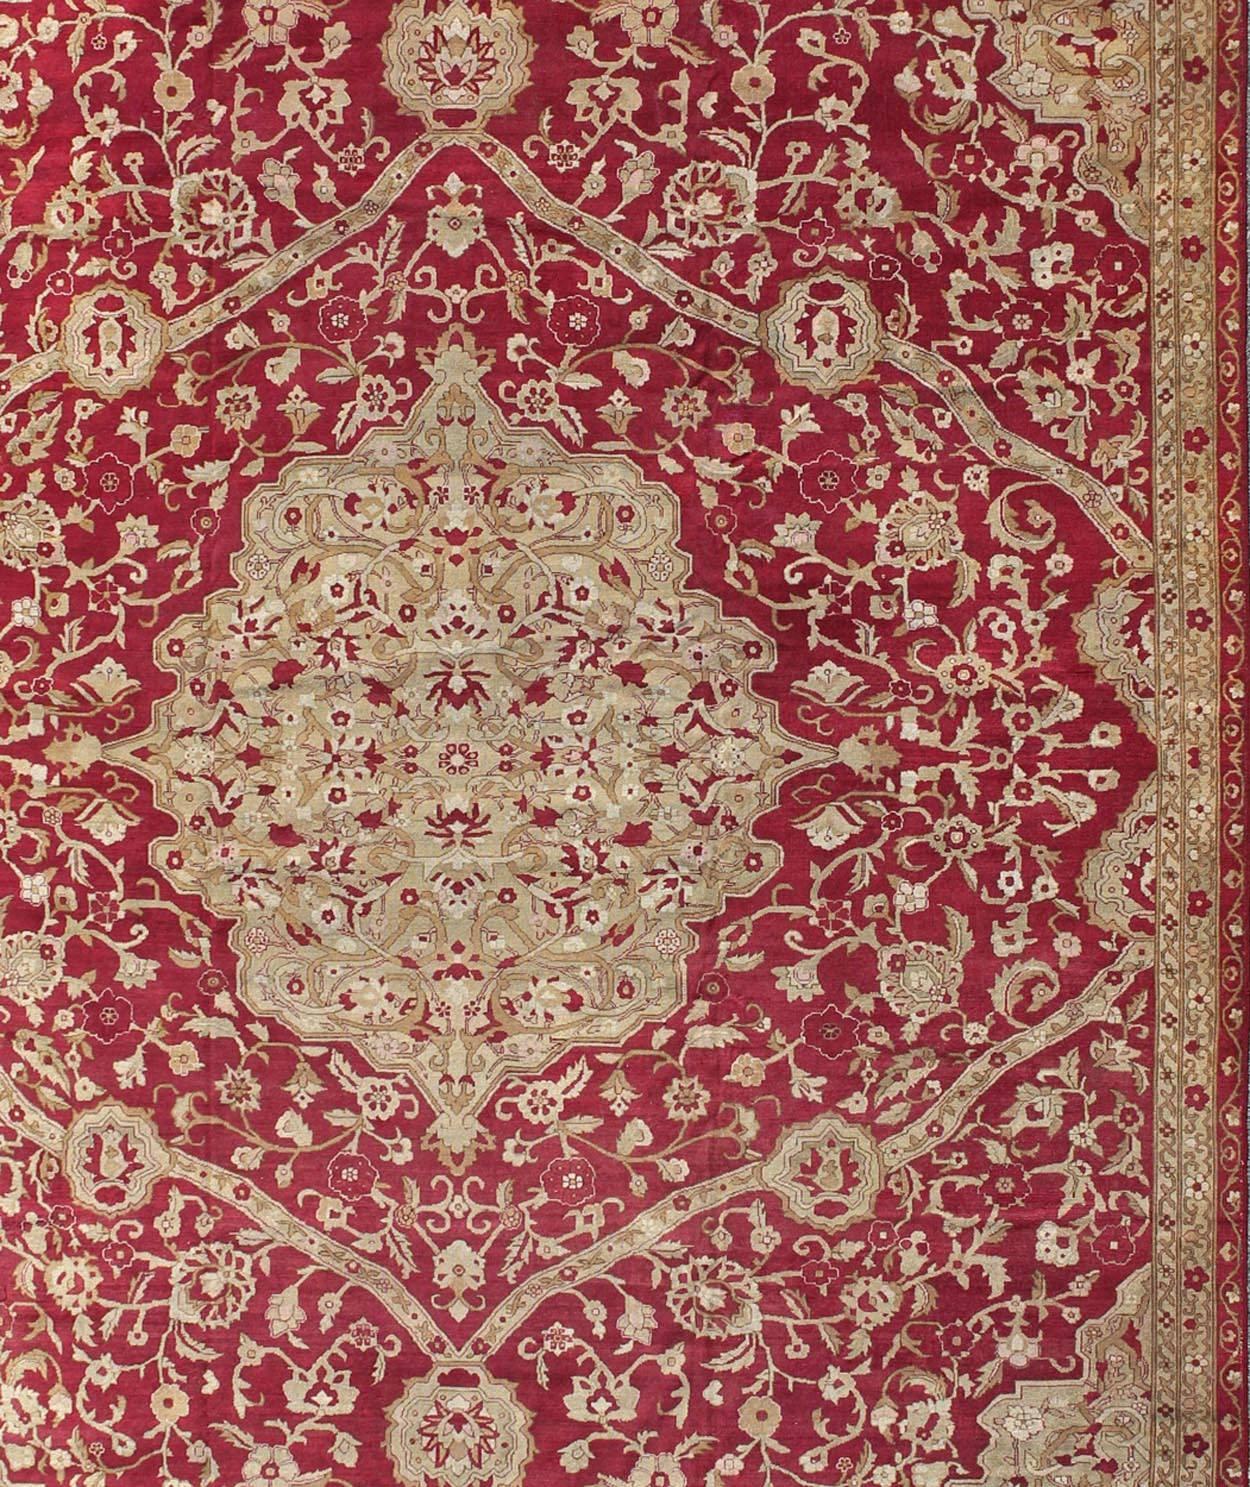 Hand-Knotted Large Antique Agra Carpet with Floral Design in Red, Taupe and Light Green 